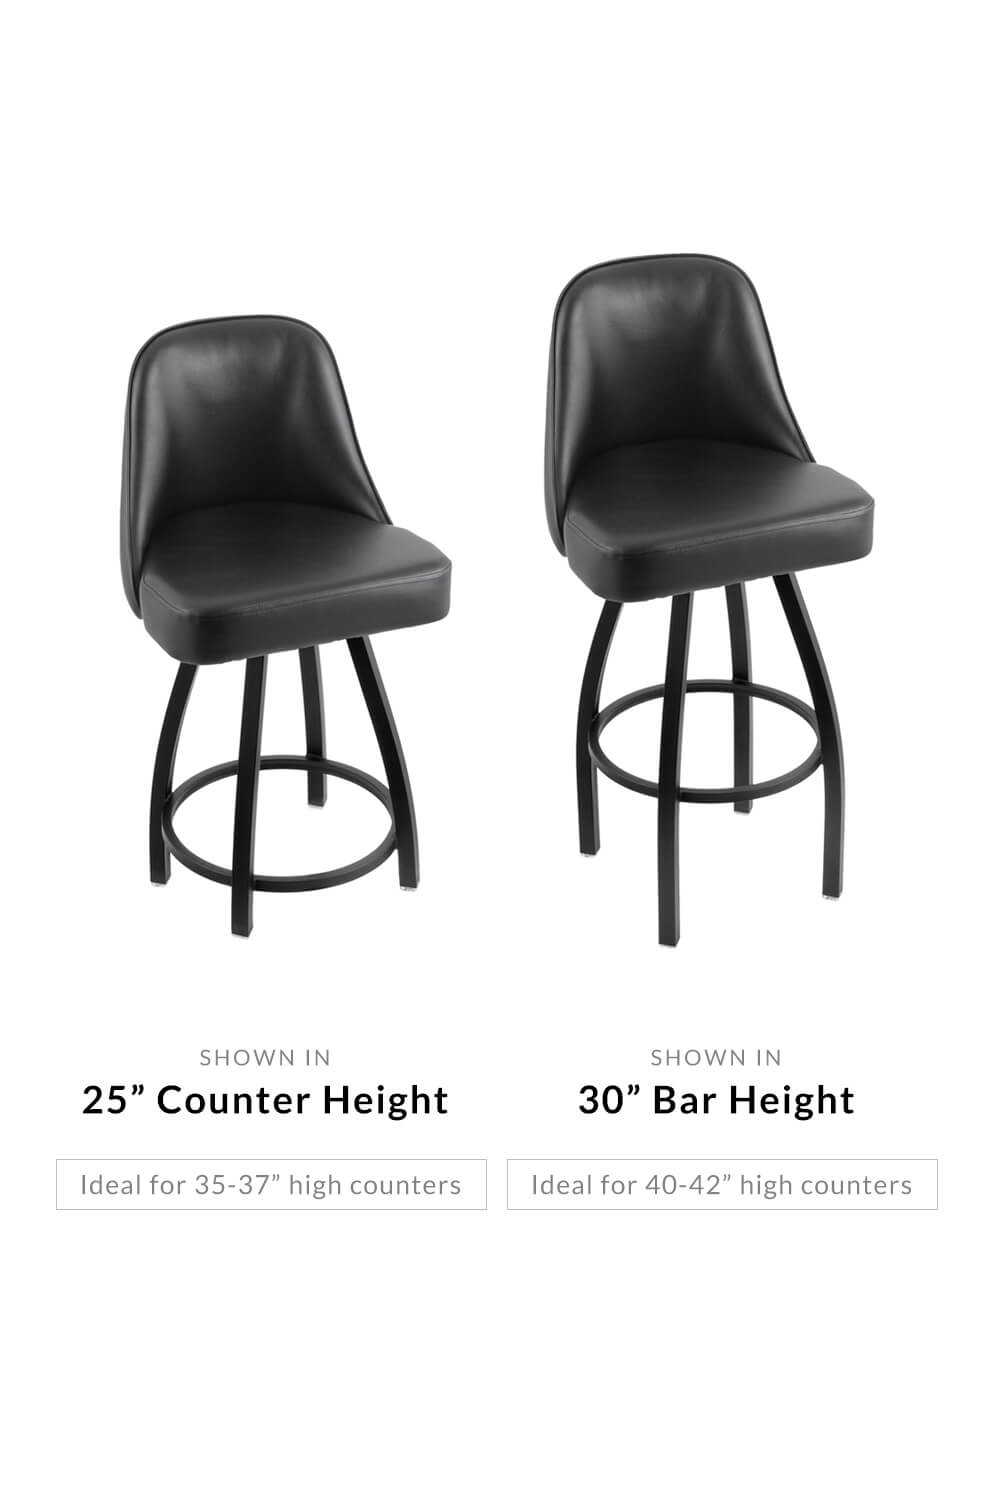 Buy Holland's Grizzly Swivel Bar Stool in Black Vinyl - Customize!